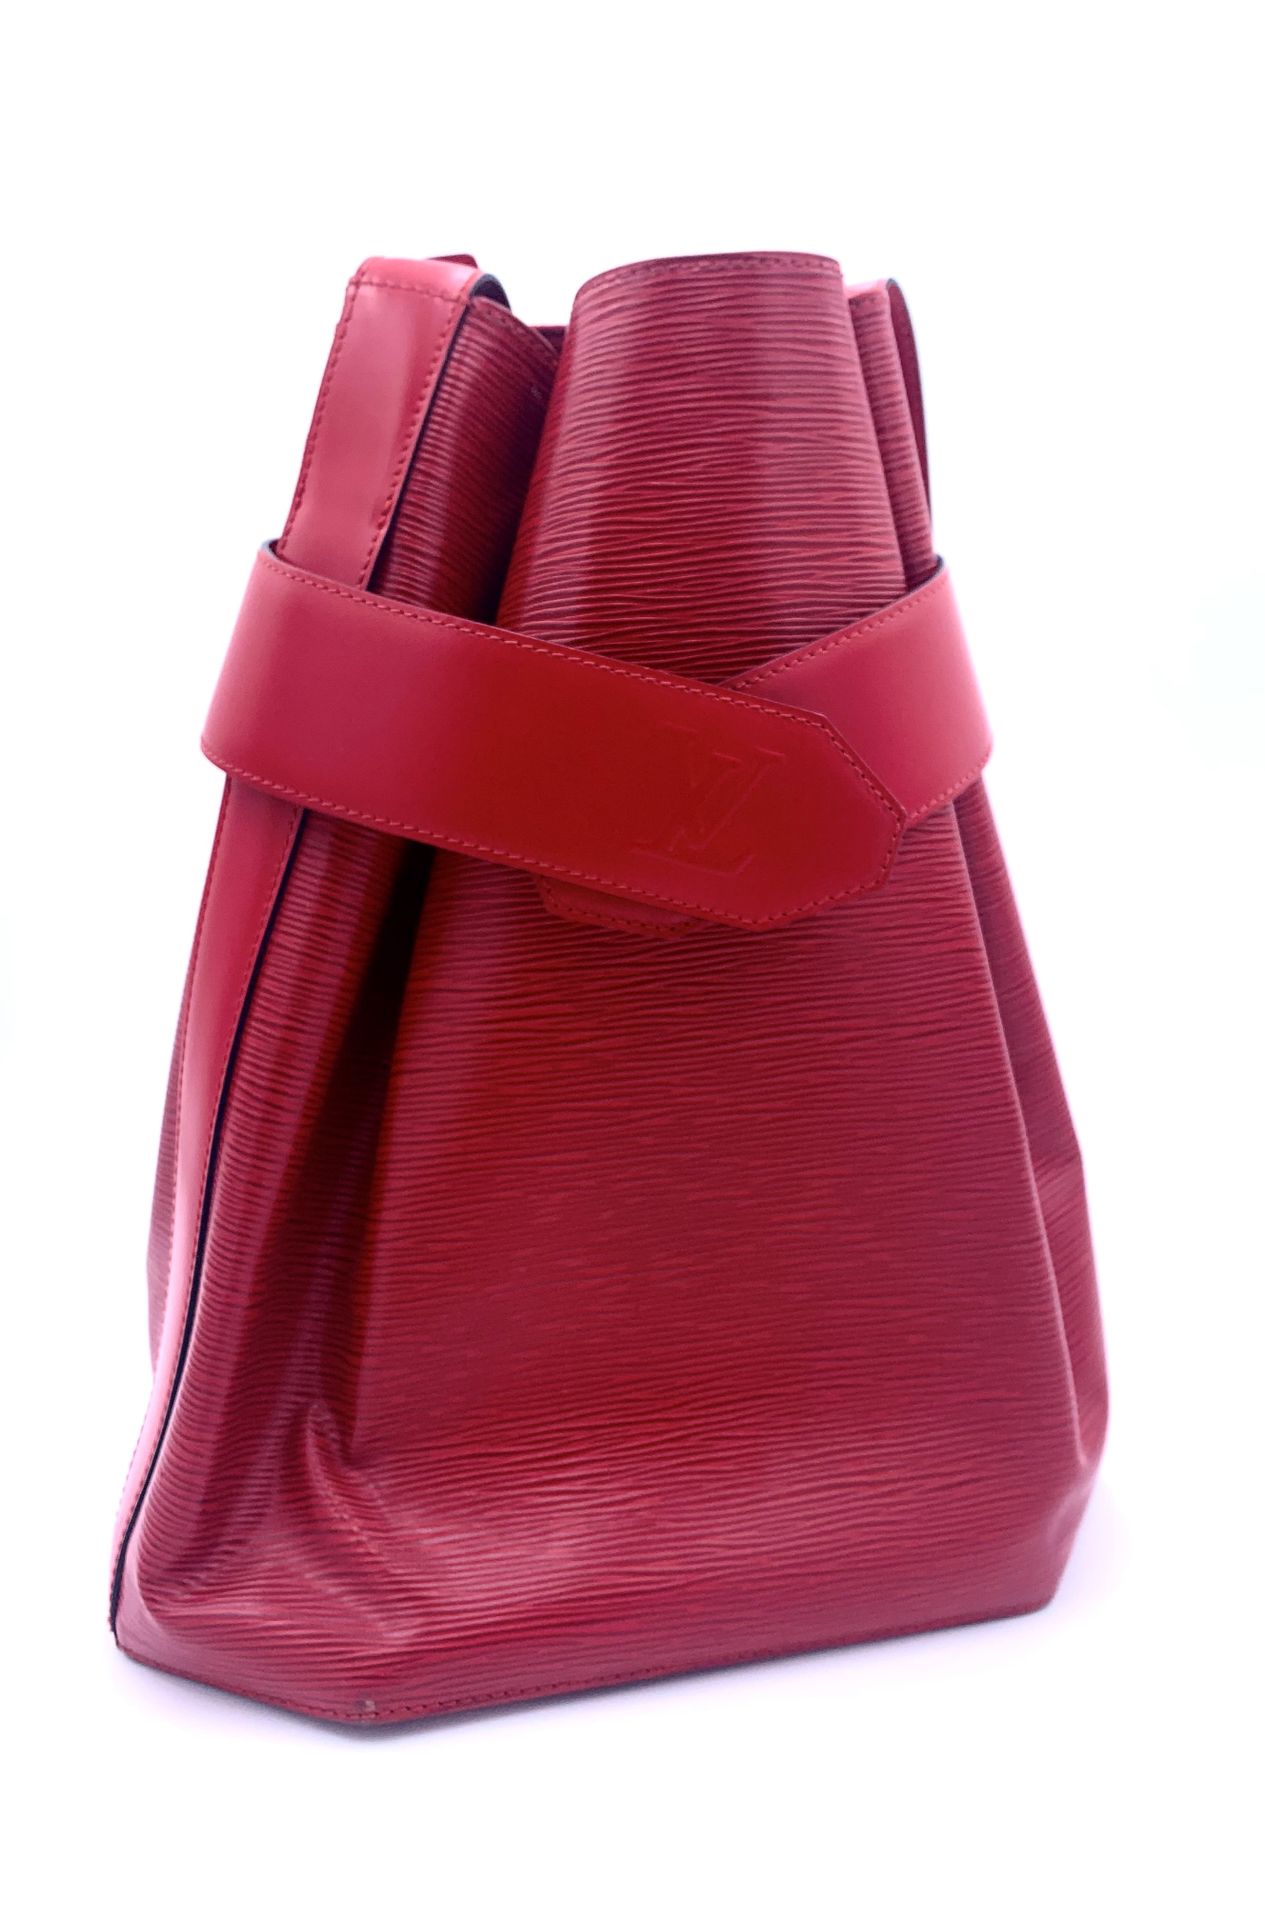 Louis VUITTON, red leather shoulder bag. Snap closure on…